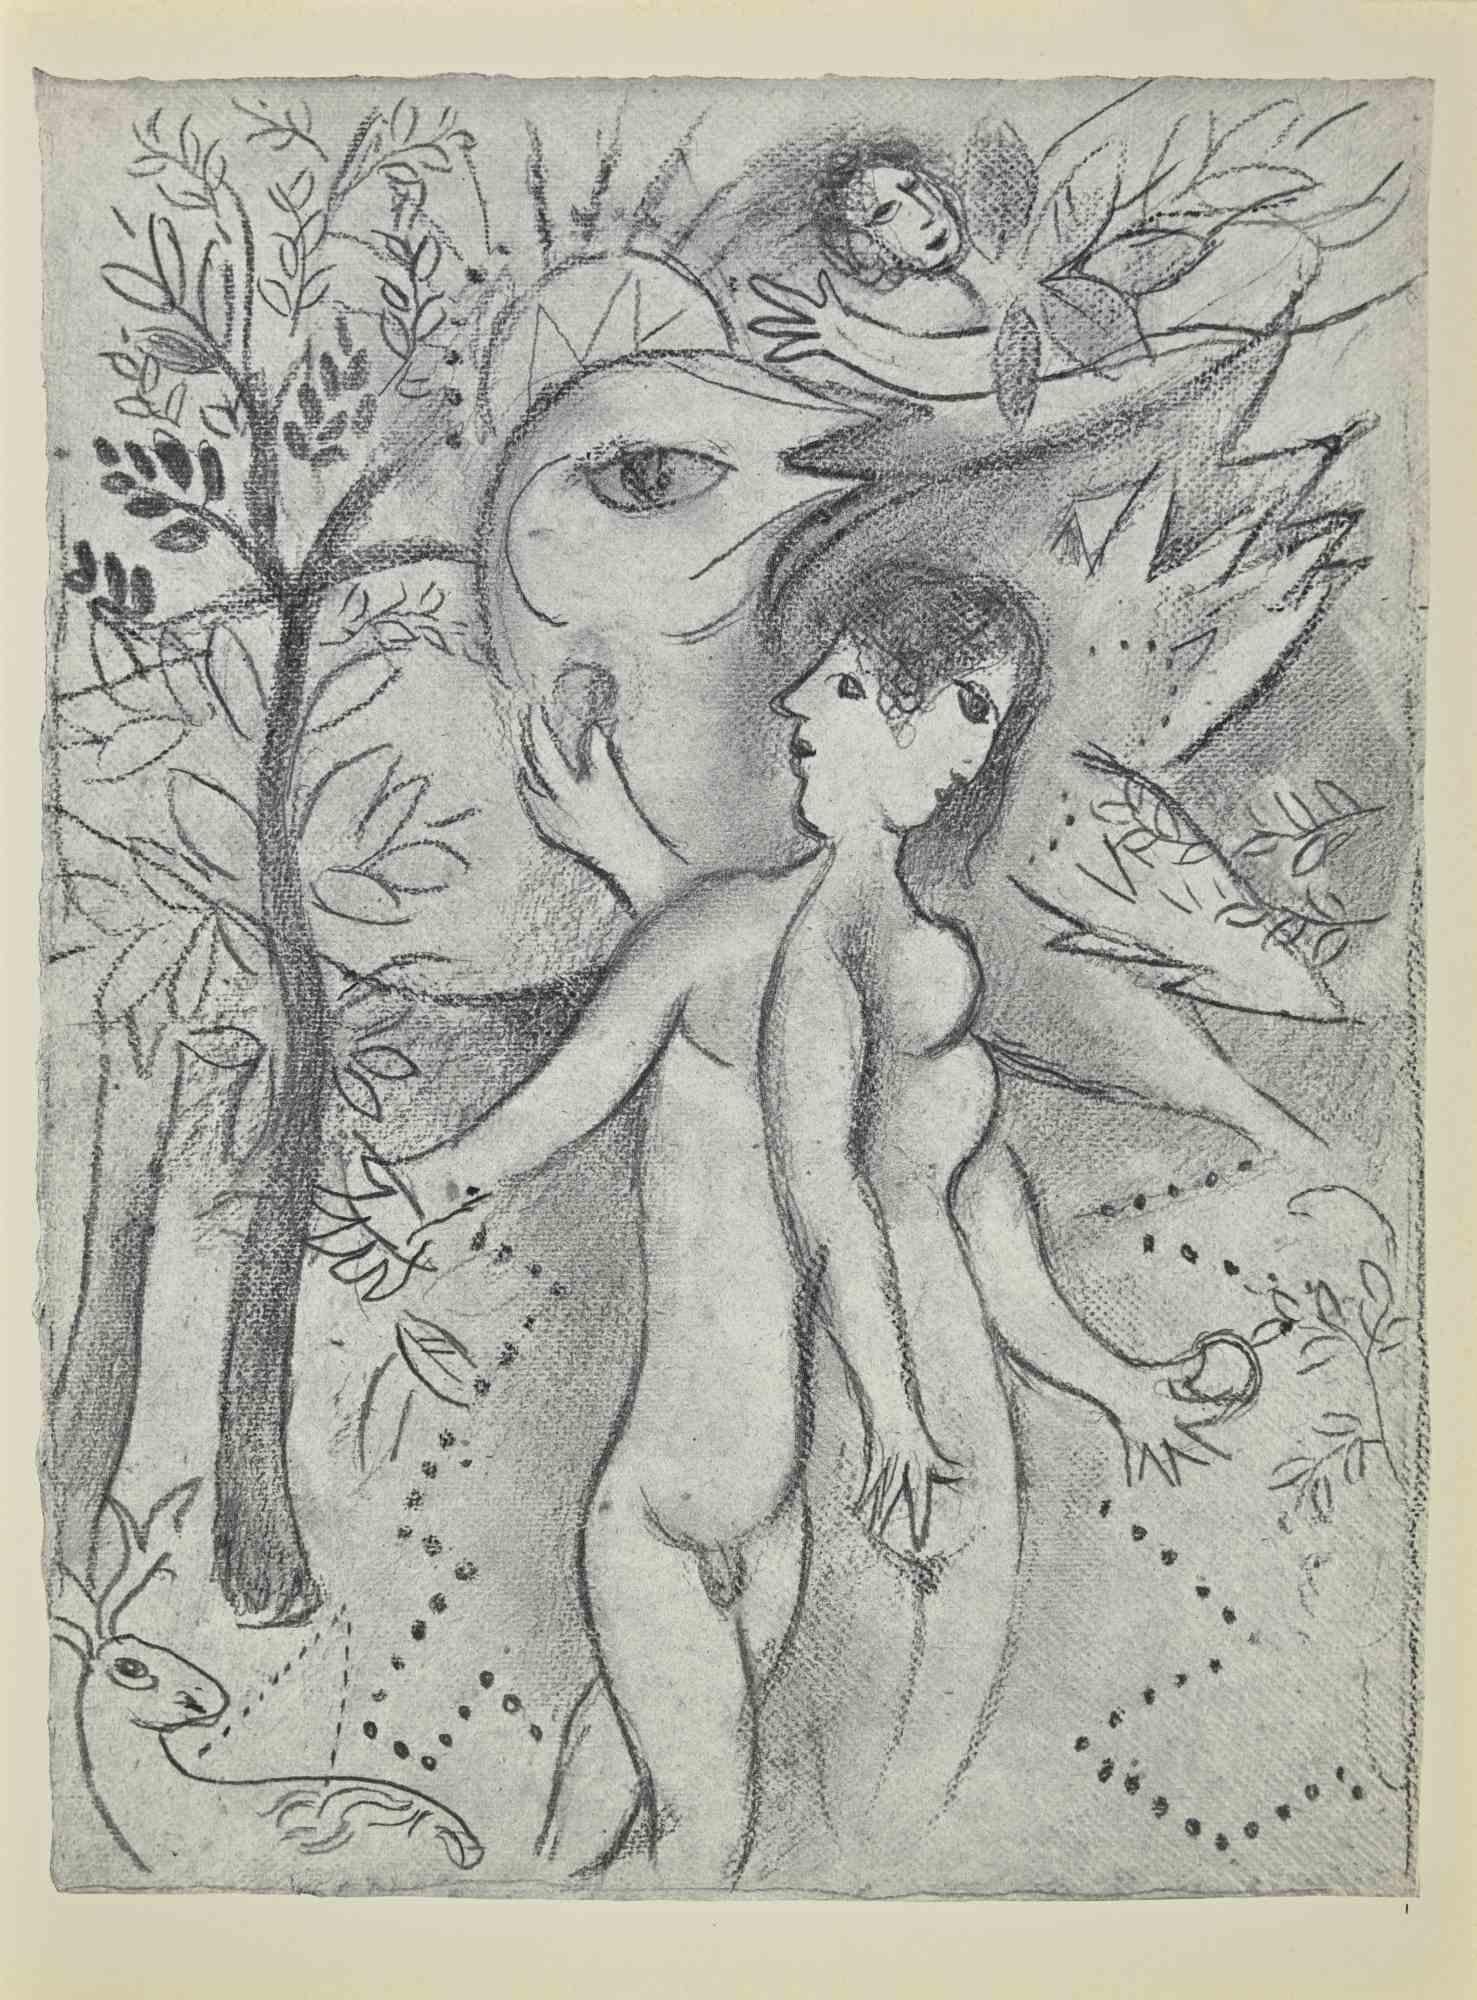 Adam and Eve is an artwork realized by March Chagall, 1960s. 

Lithograph on brown-toned paper, no signature.

Lithograph on both sheets.

Edition of 6500 unsigned lithographs. Printed by Mourlot and published by Tériade, Paris.

Ref. Mourlot, F.,